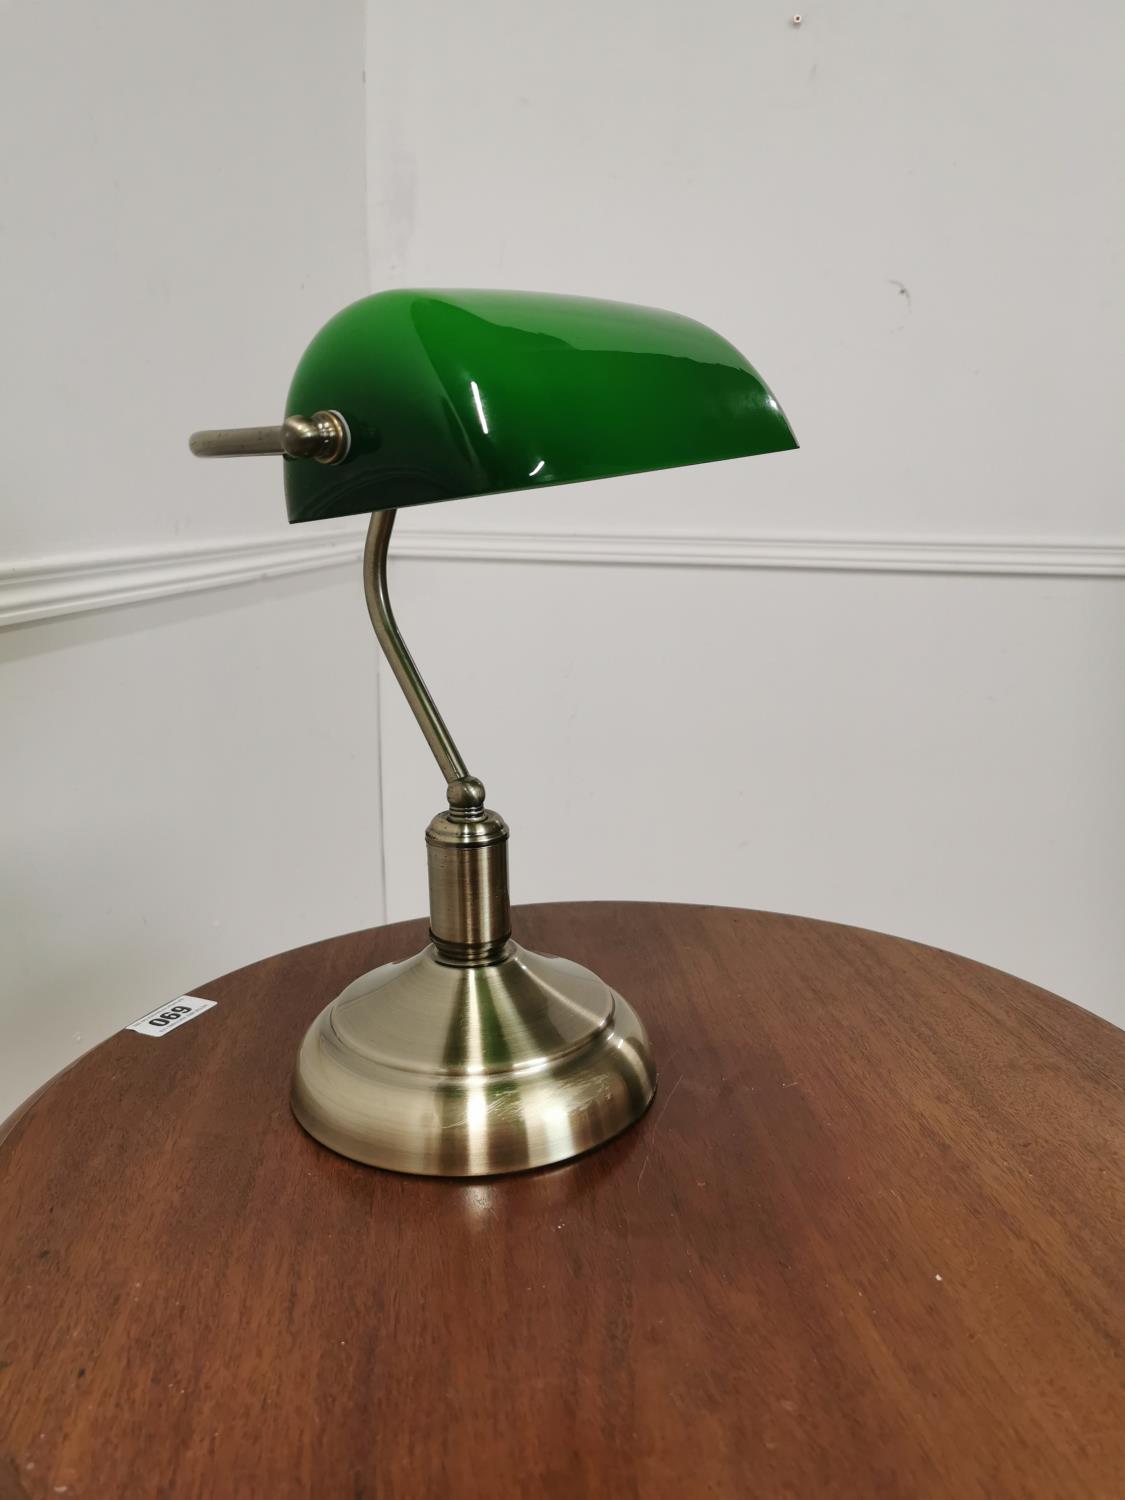 Banker's chrome desk lamp with green glass shade { 32cm H X 26cm W X 15cm D }. - Image 2 of 3